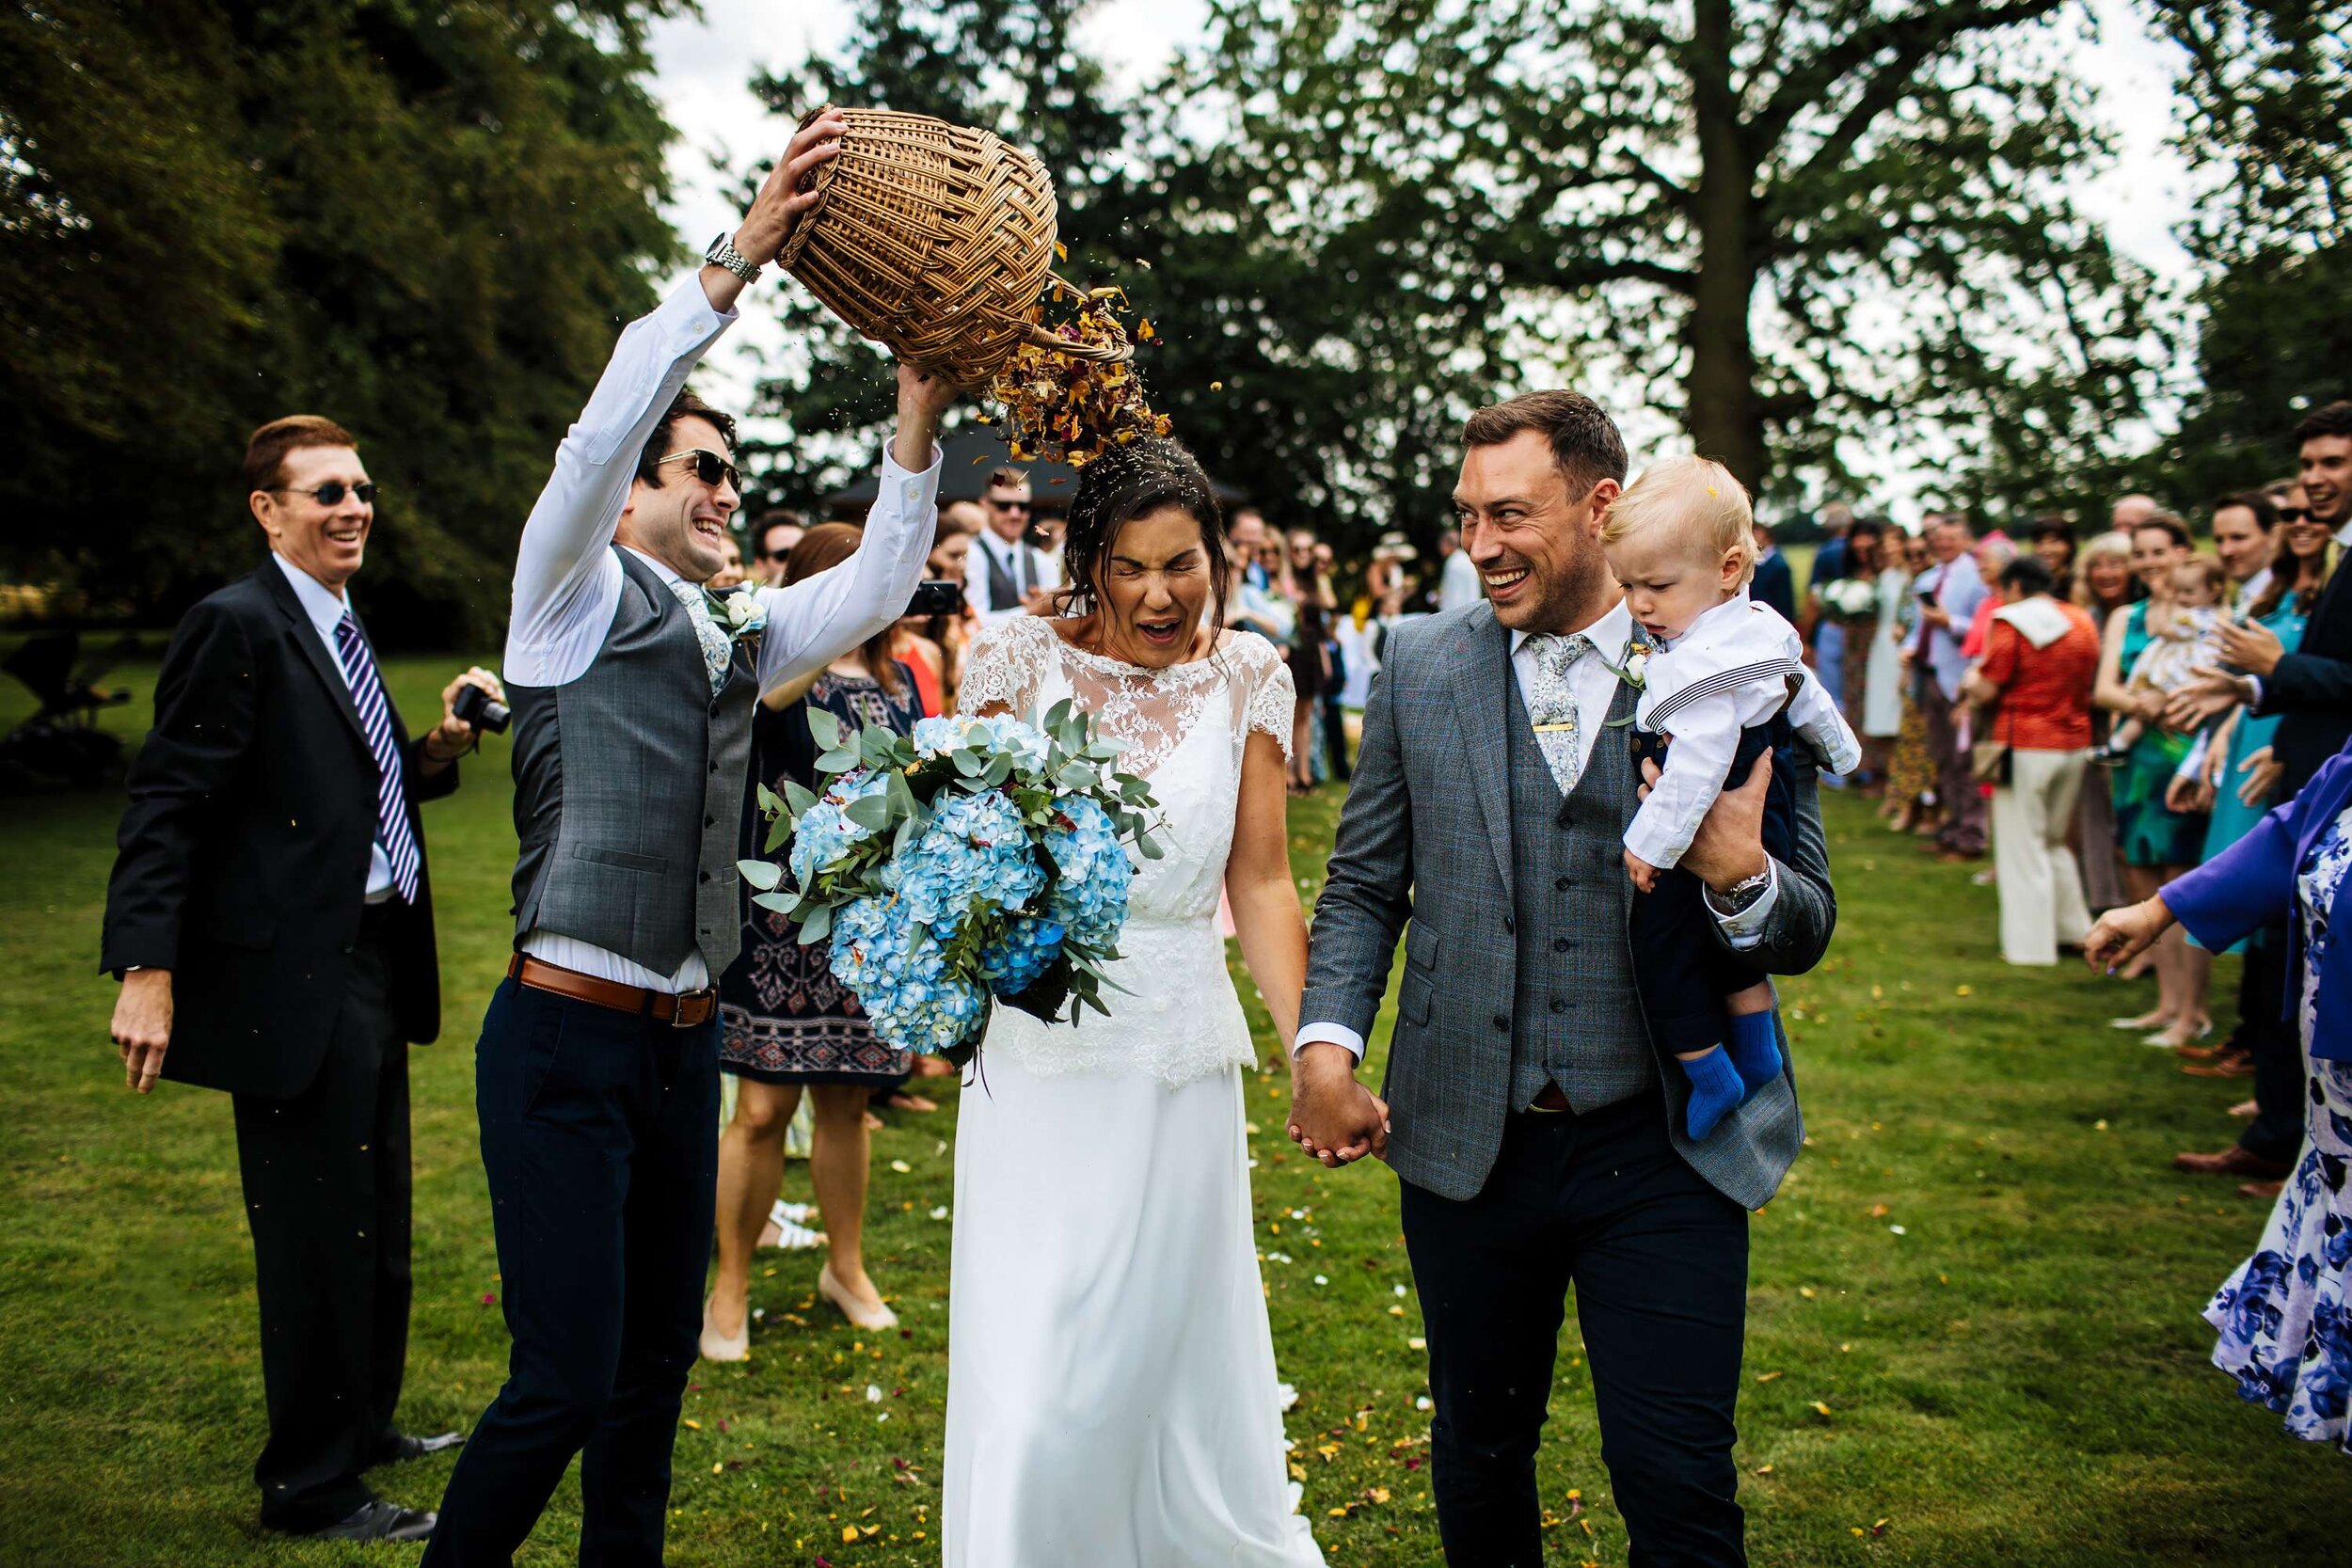 Groomsman throws a full bucket of confetti over the bride